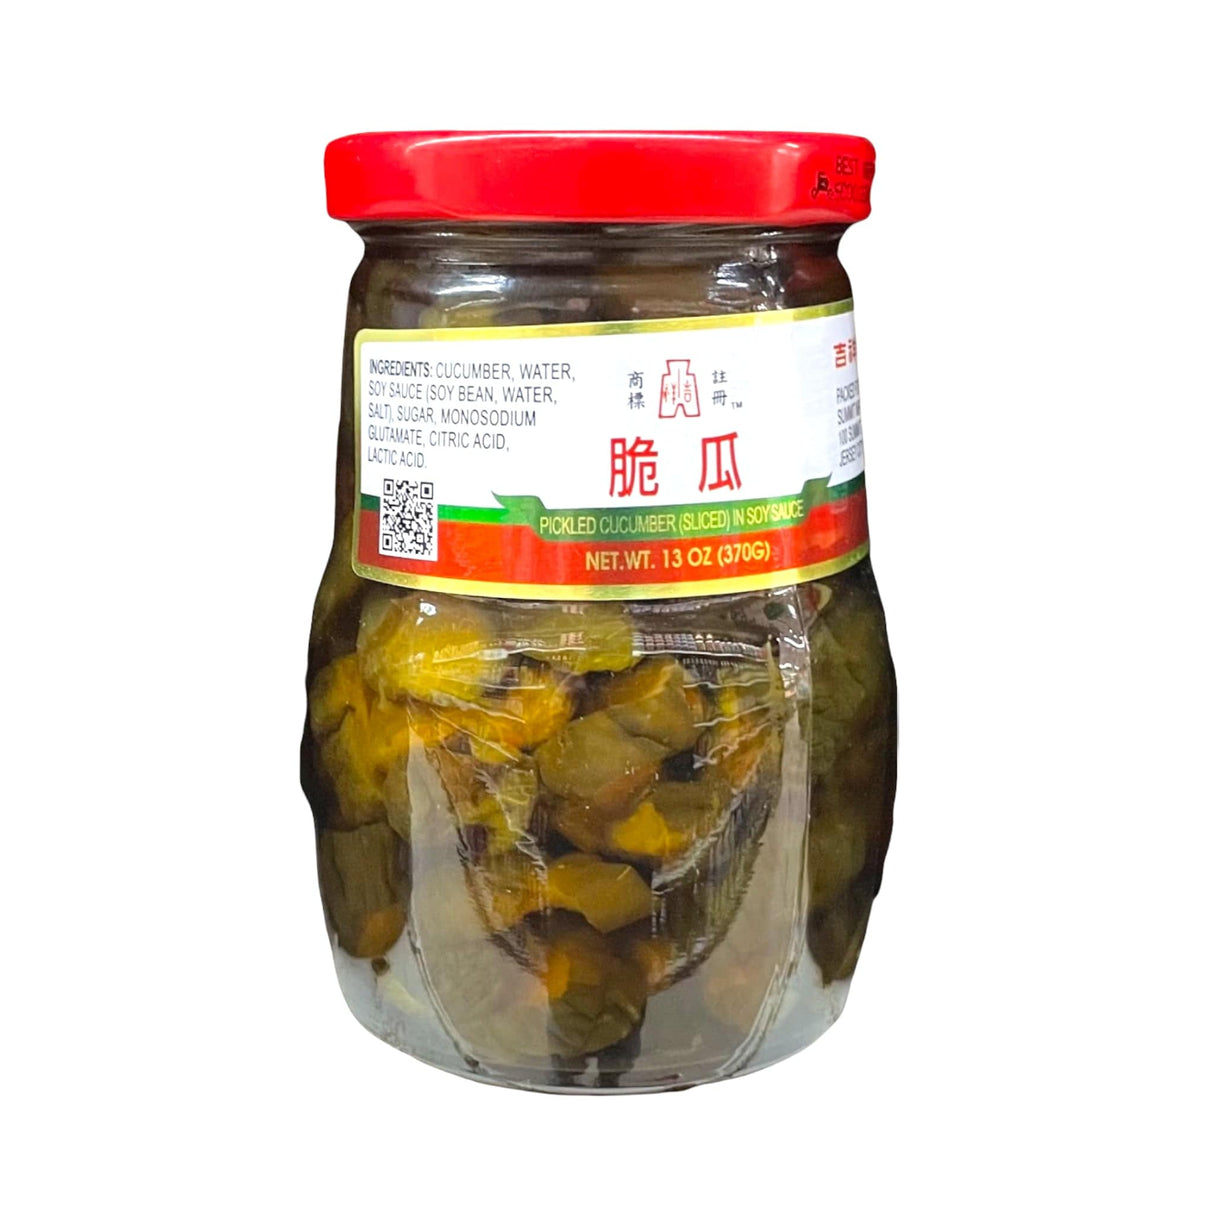 Oriental Mascot Pickled Cucumber (Sliced) in Soy Sauce